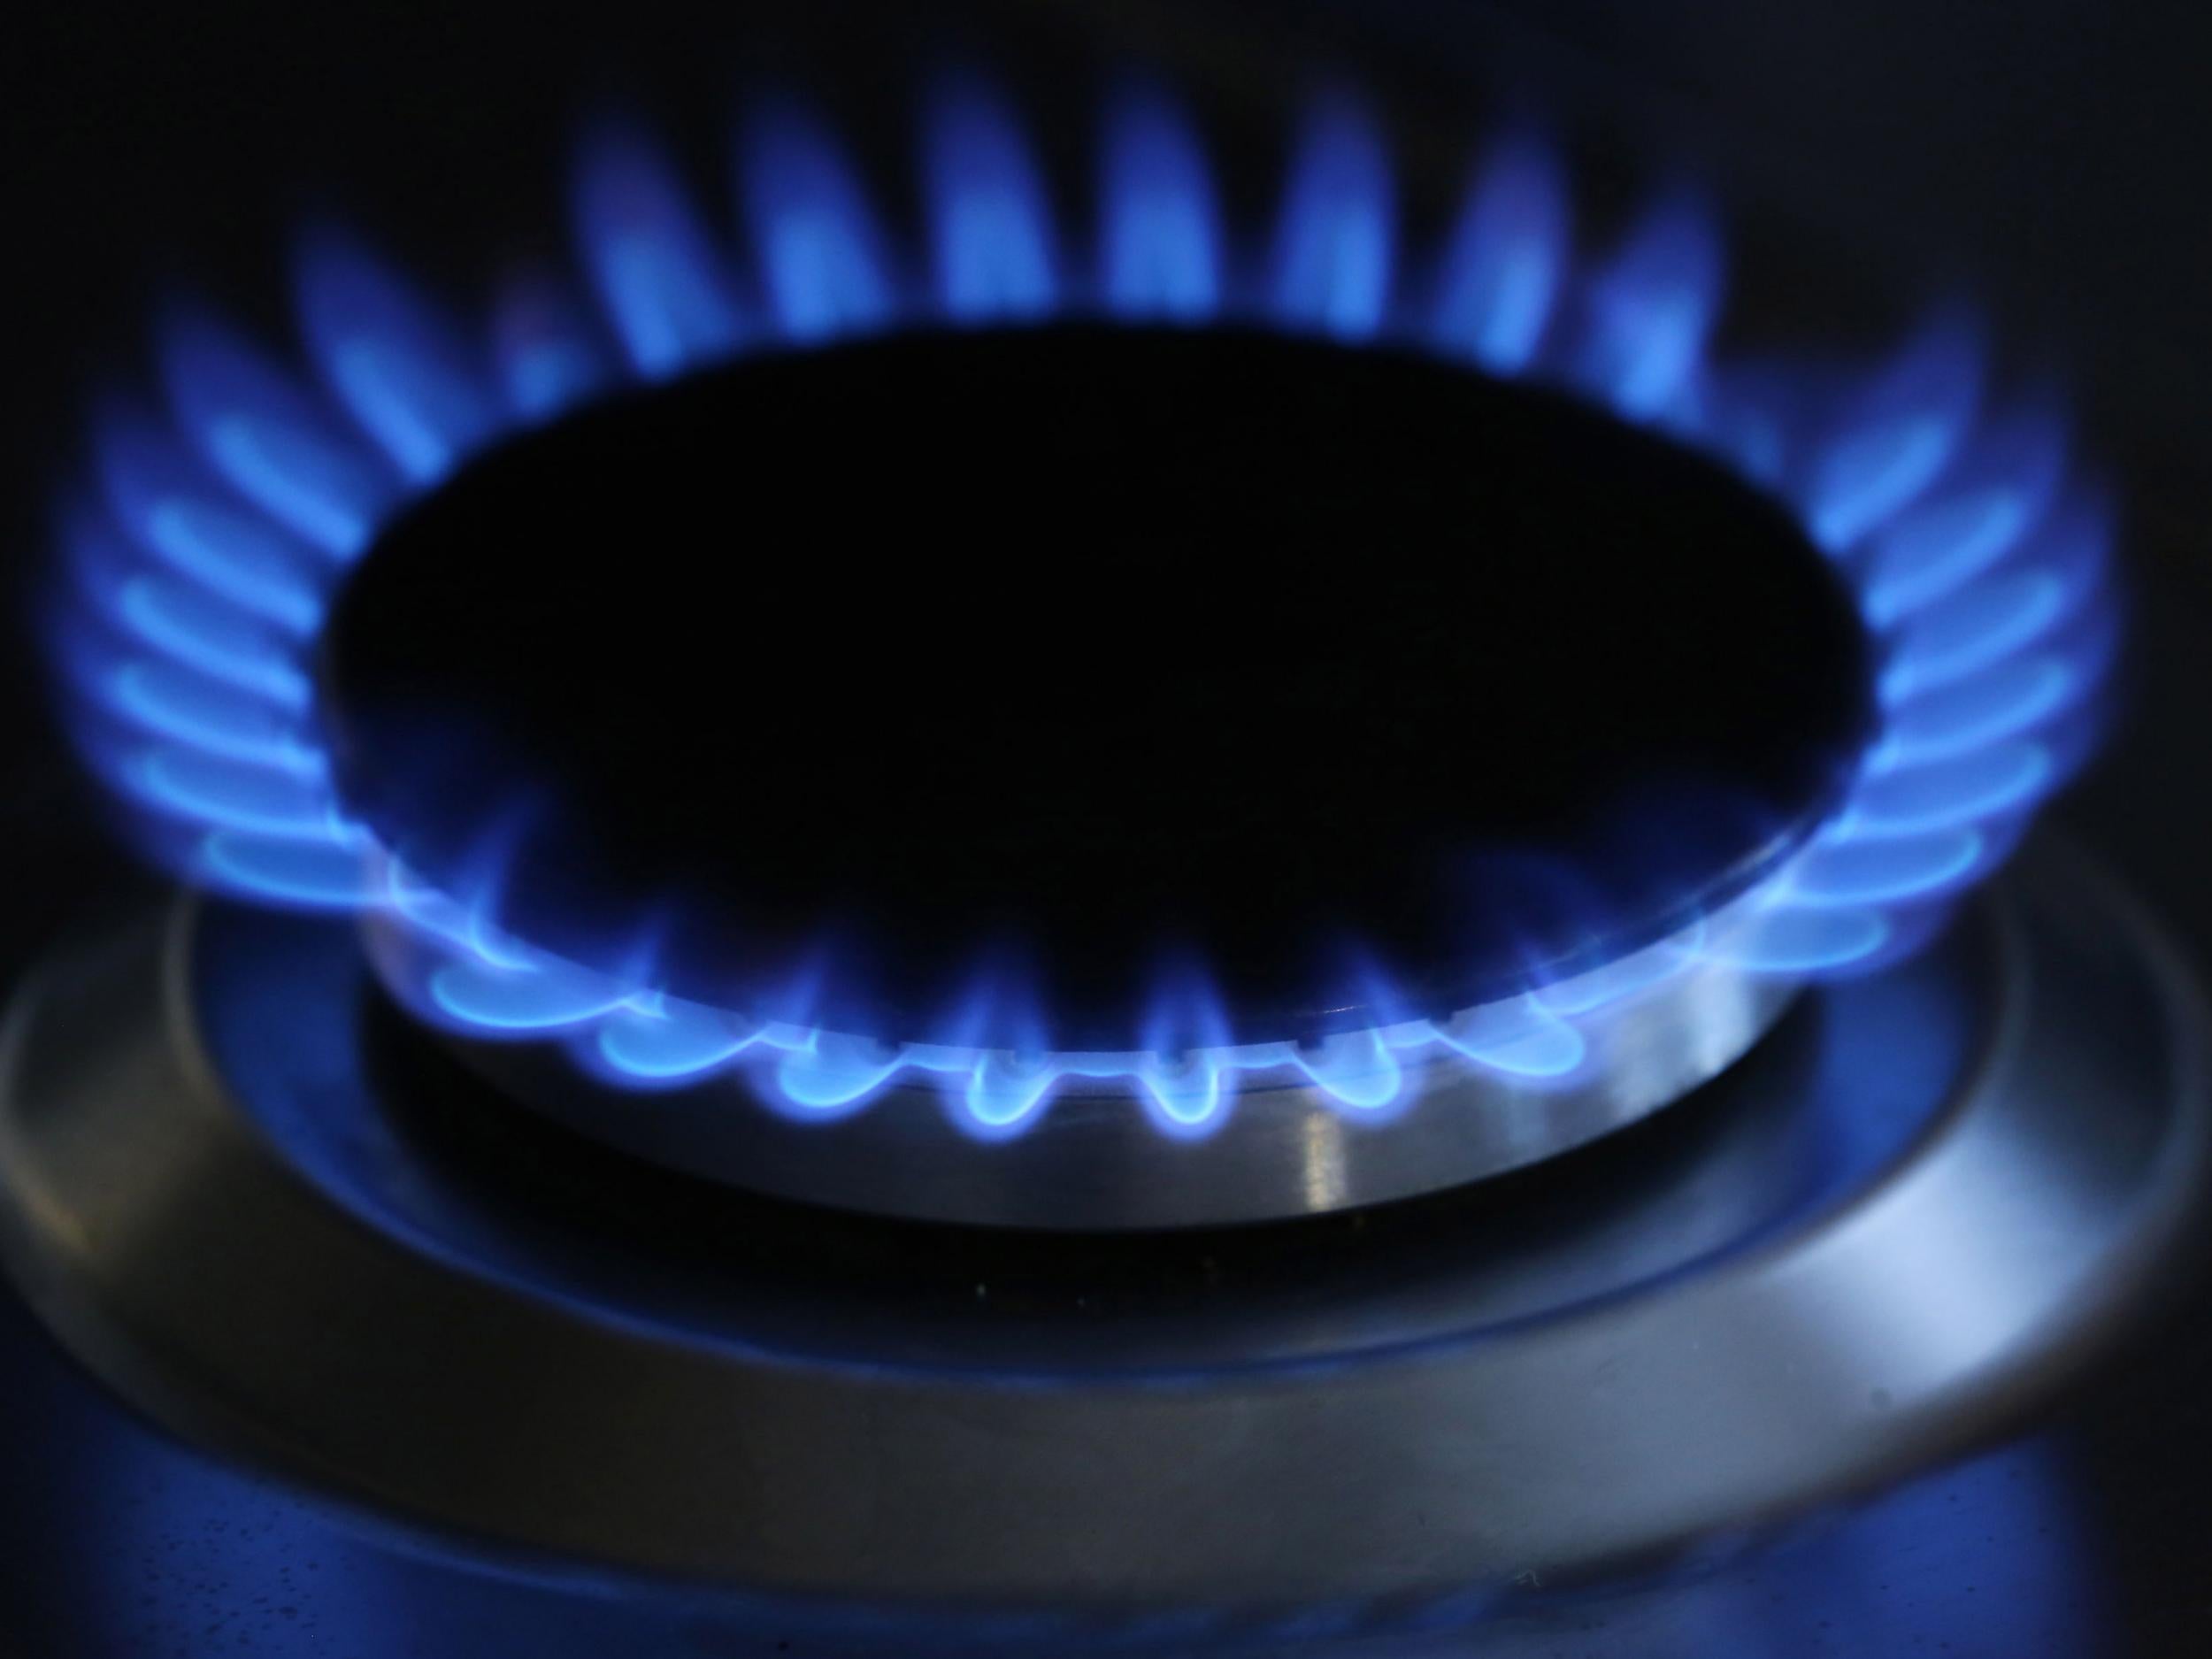 An average household on British Gas’s standard variable tariff will see its gas and electricity bill rise to £1,254